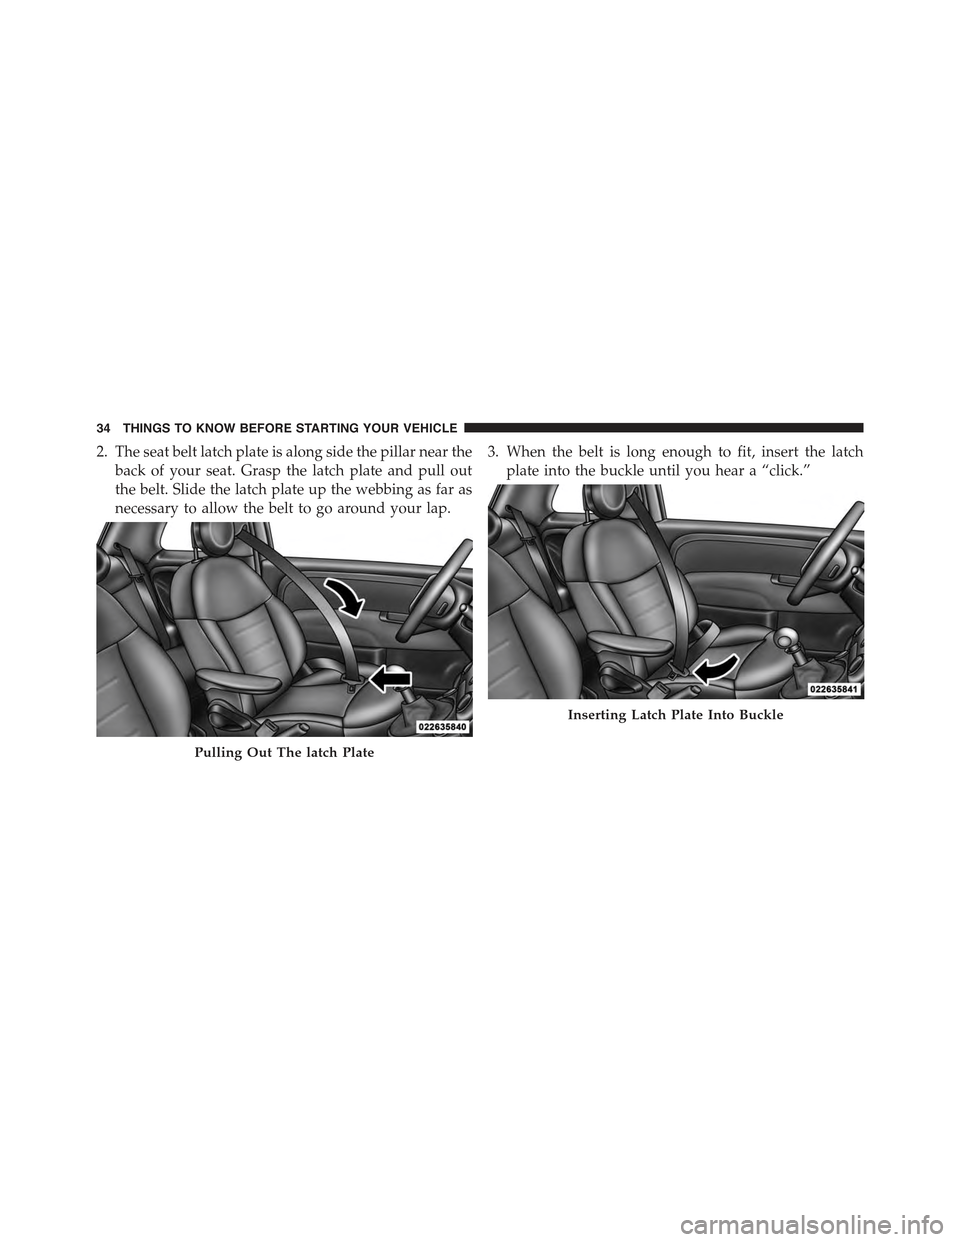 FIAT 500C 2013 2.G Owners Guide 2. The seat belt latch plate is along side the pillar near the
back of your seat. Grasp the latch plate and pull out
the belt. Slide the latch plate up the webbing as far as
necessary to allow the bel